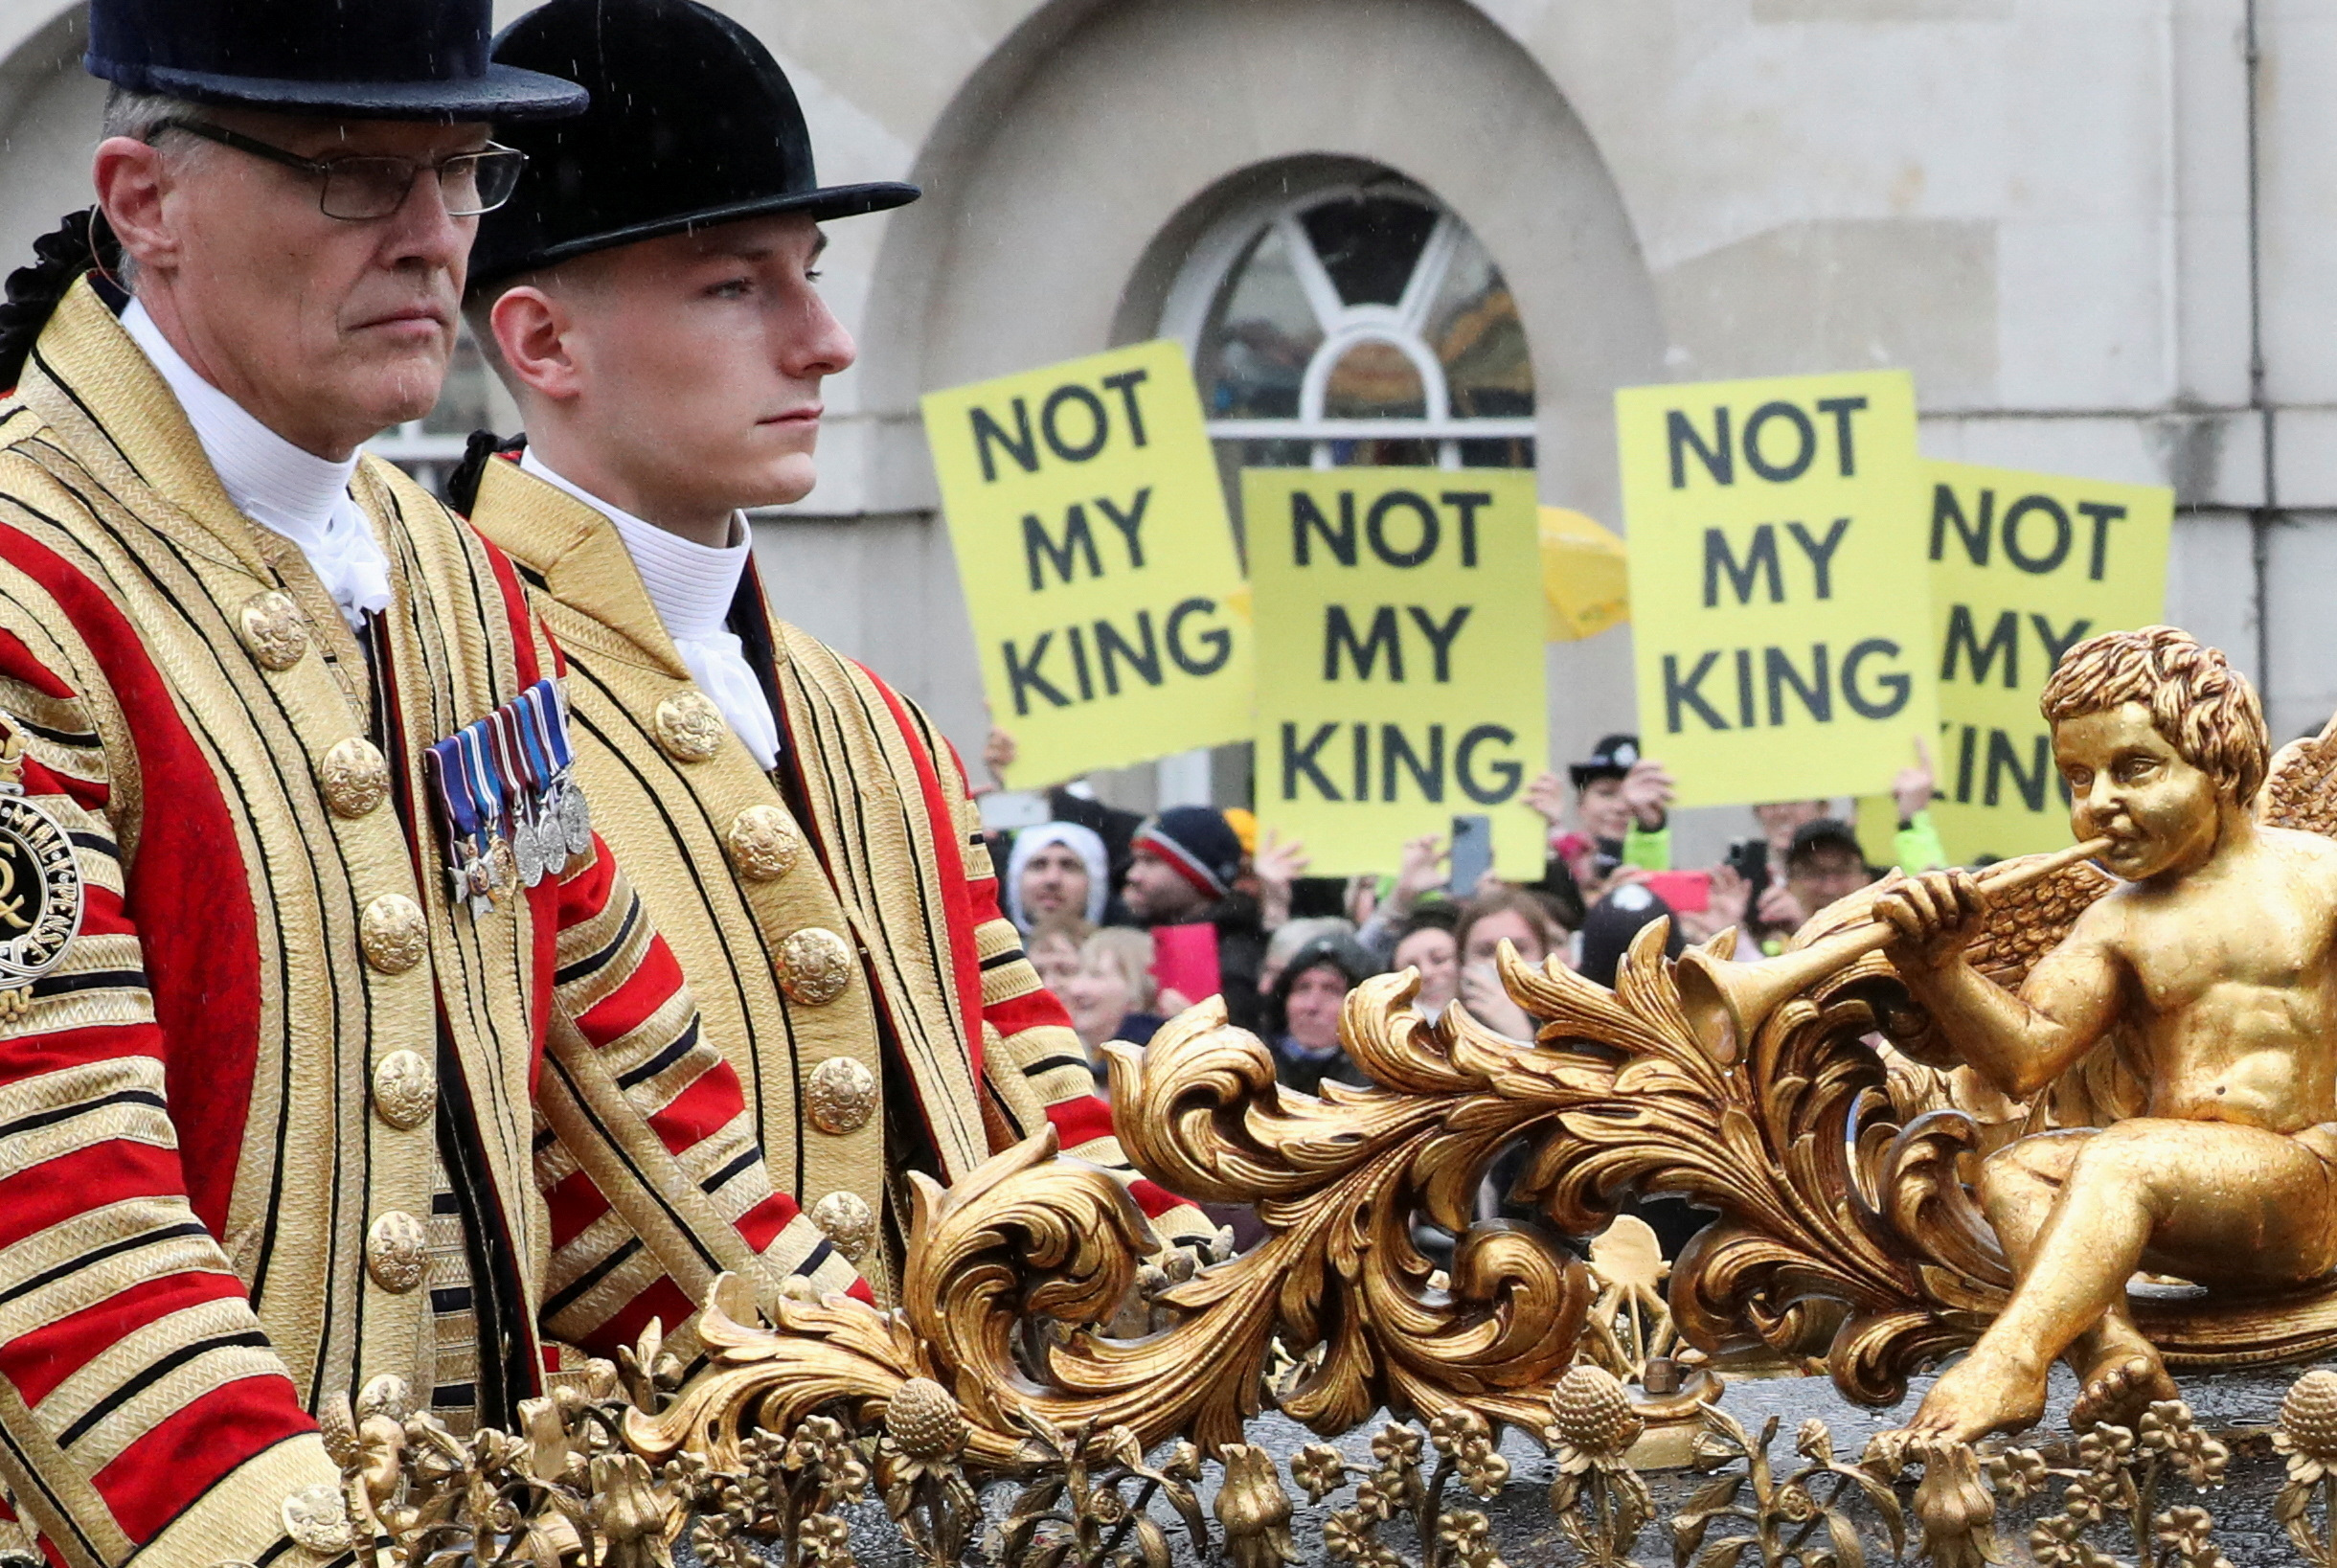 A coach carrying Prince William and Kate at the Coronation rides past protesters. /Violeta Santos Moura/Reuters